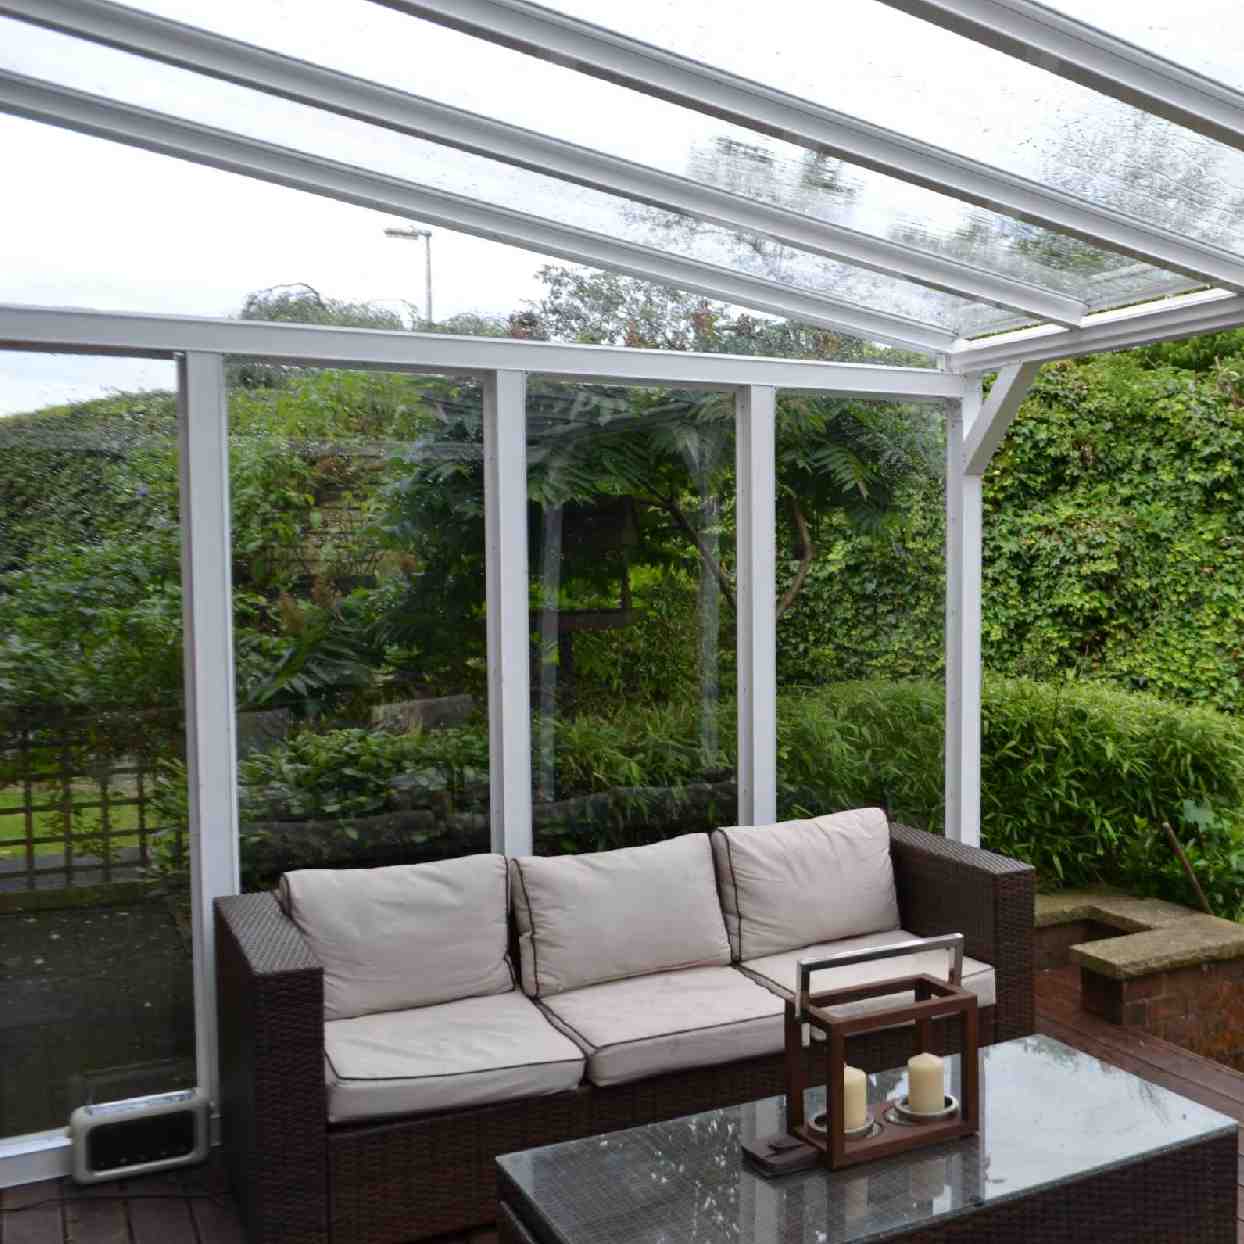 Buy Omega Verandah White with 16mm Polycarbonate Glazing - 6.0m (W) x 2.0m (P), (3) Supporting Posts online today